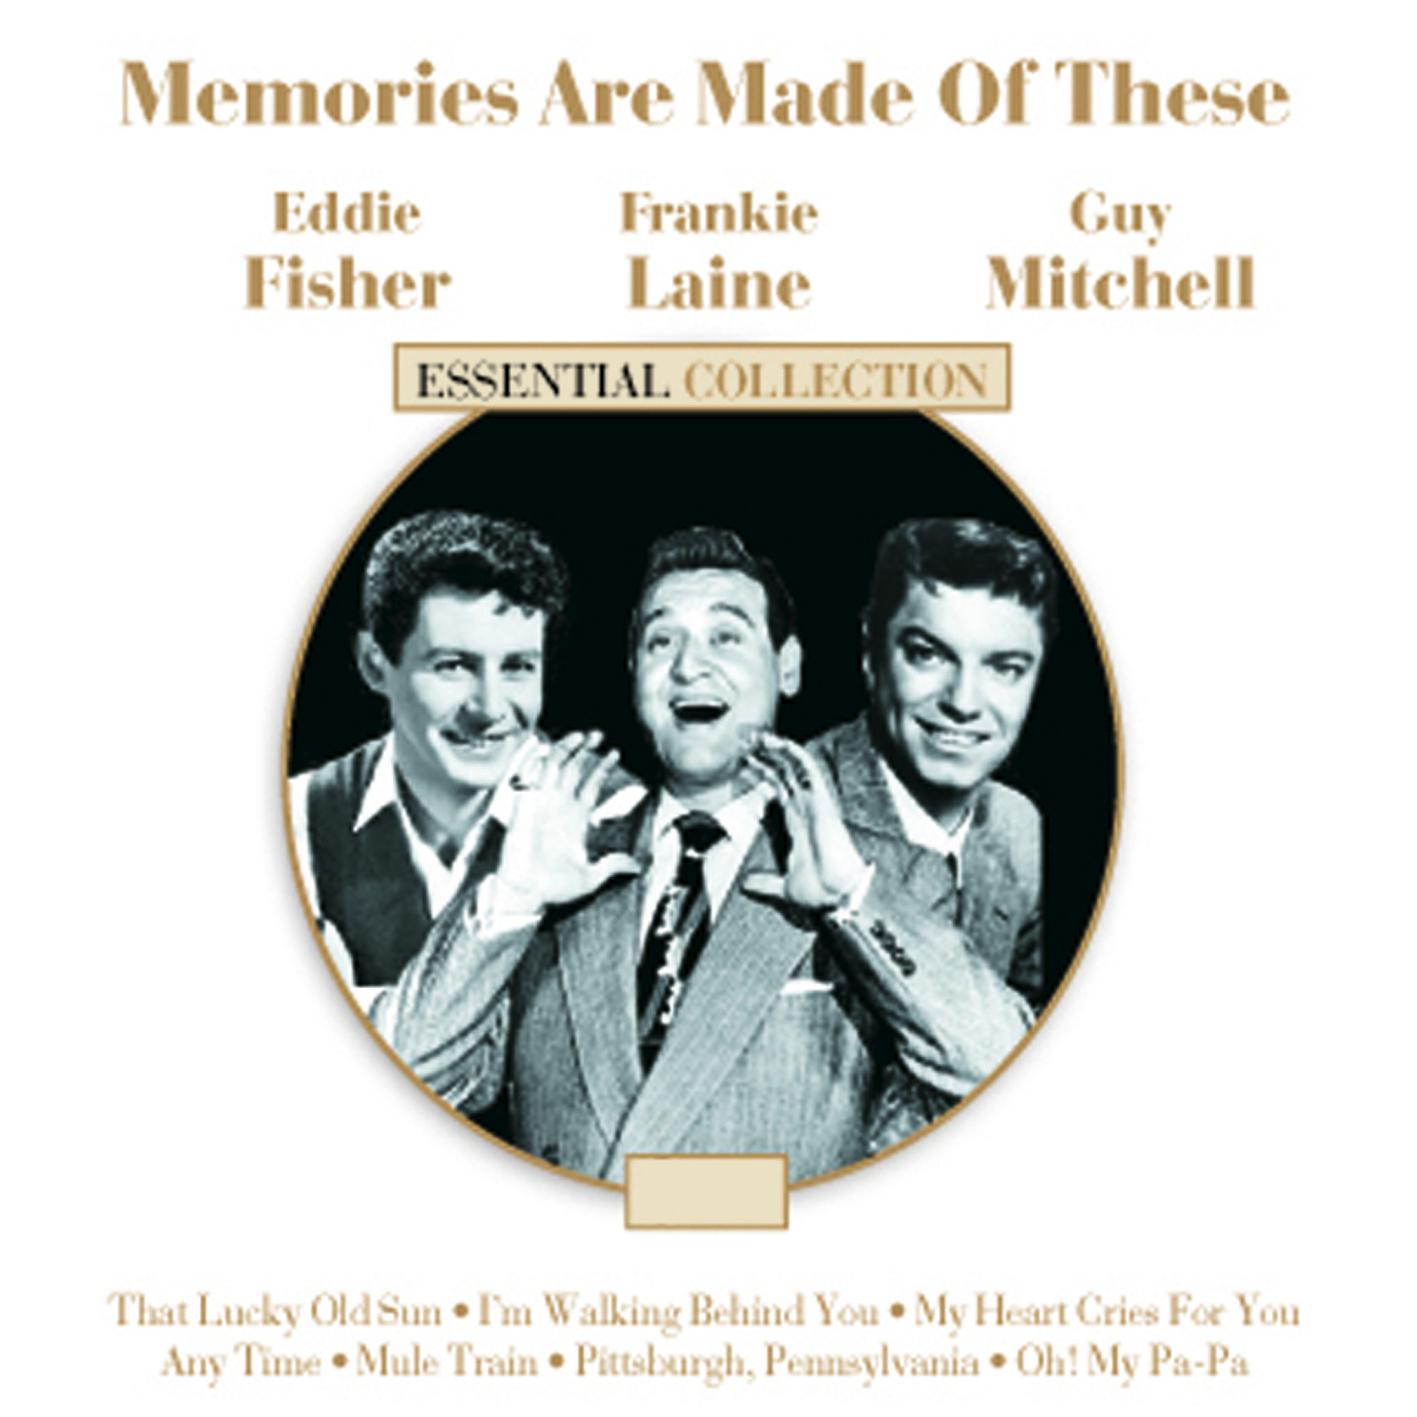 Memories are Made of These - Frankie Laine/Eddie Fisher/Guy Mitchell